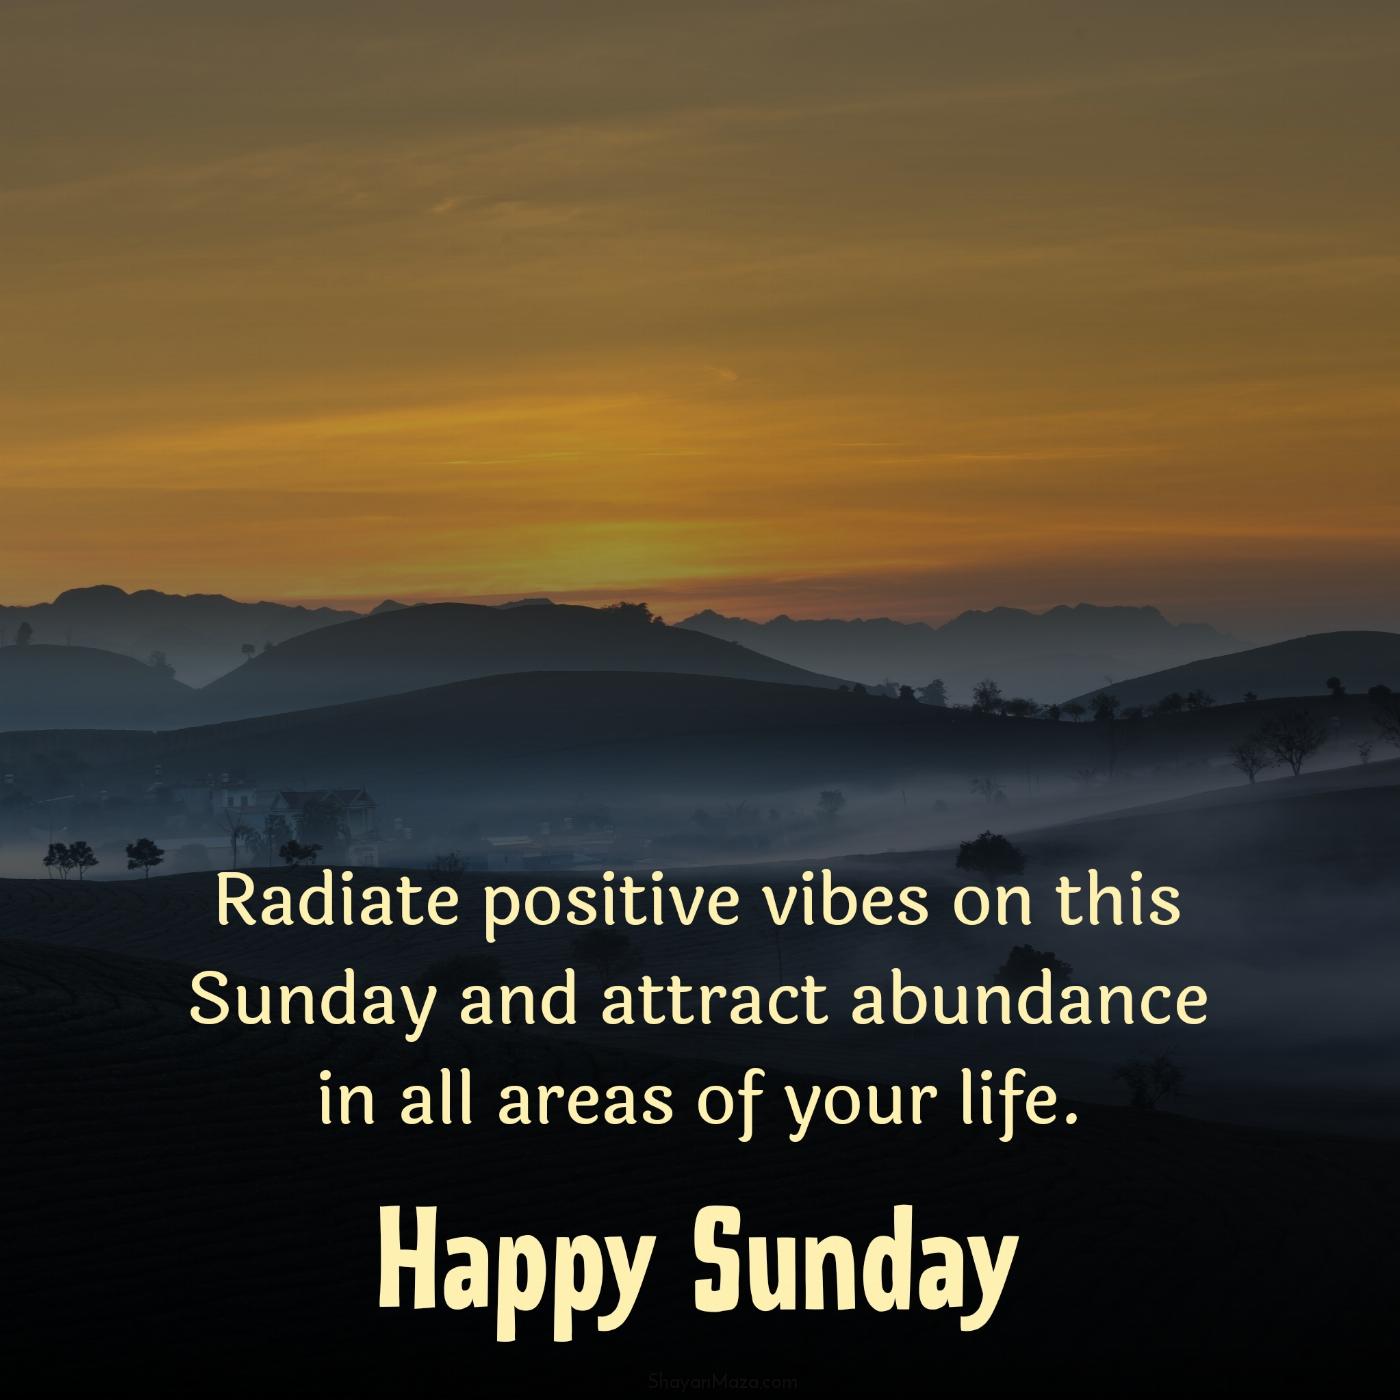 Radiate positive vibes on this Sunday and attract abundance